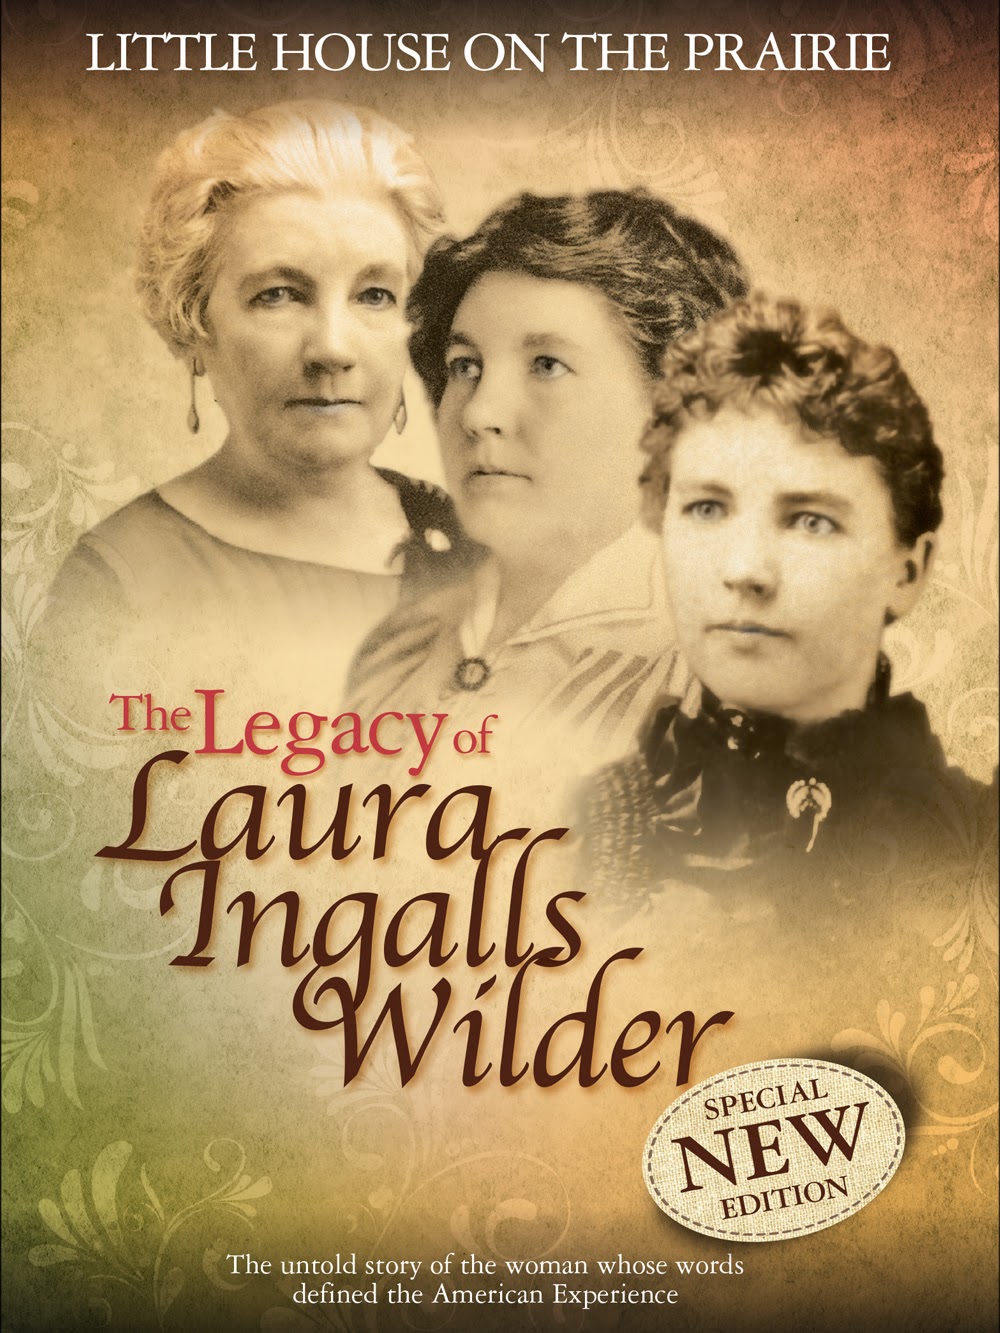 Little House on the Prairie: The Legacy of Laura Ingalls Wilder documentary.